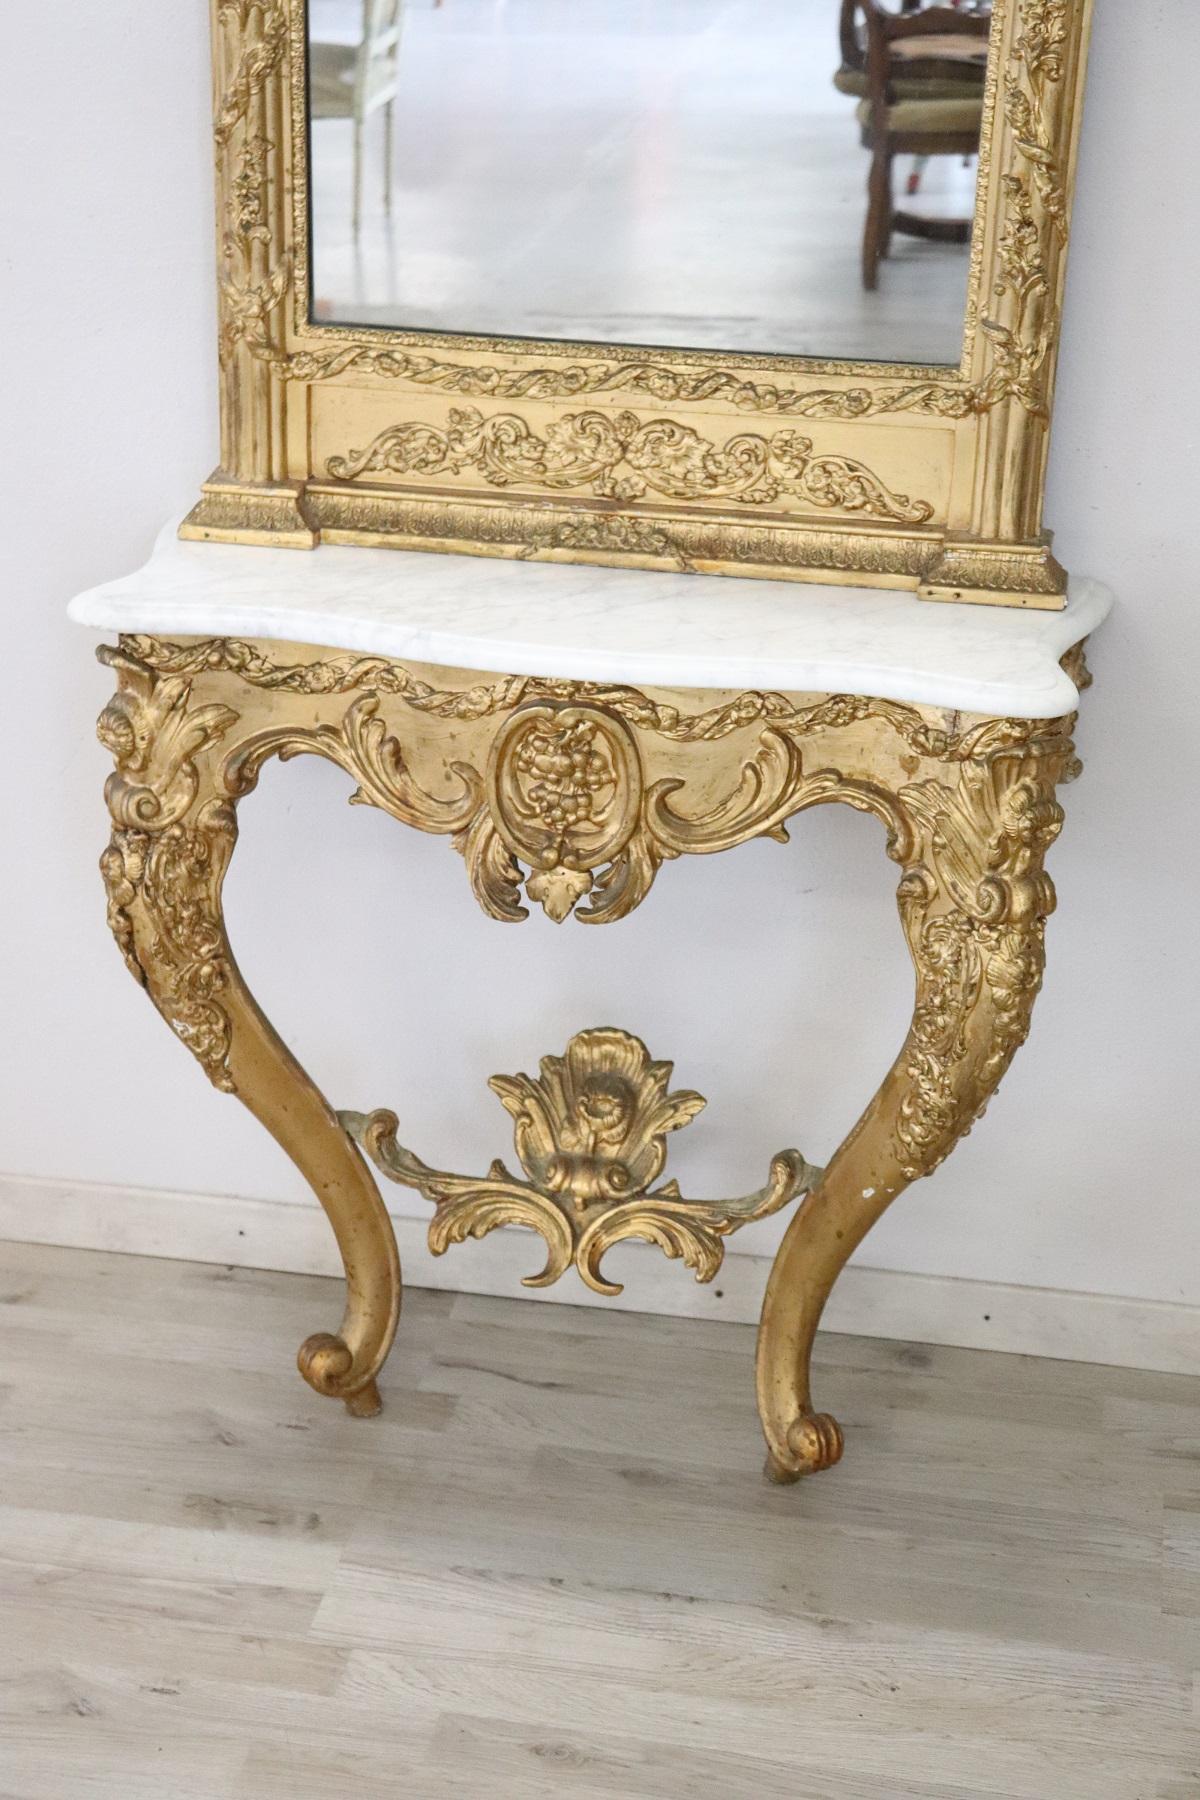 Italian antique console table, 1880. Characterized by precious carved and gilded wood. Each part of the piece of furniture is in larch wood with a fine carving in classic style. The gold plating is in perfect patina gold leaf. The large mirror is